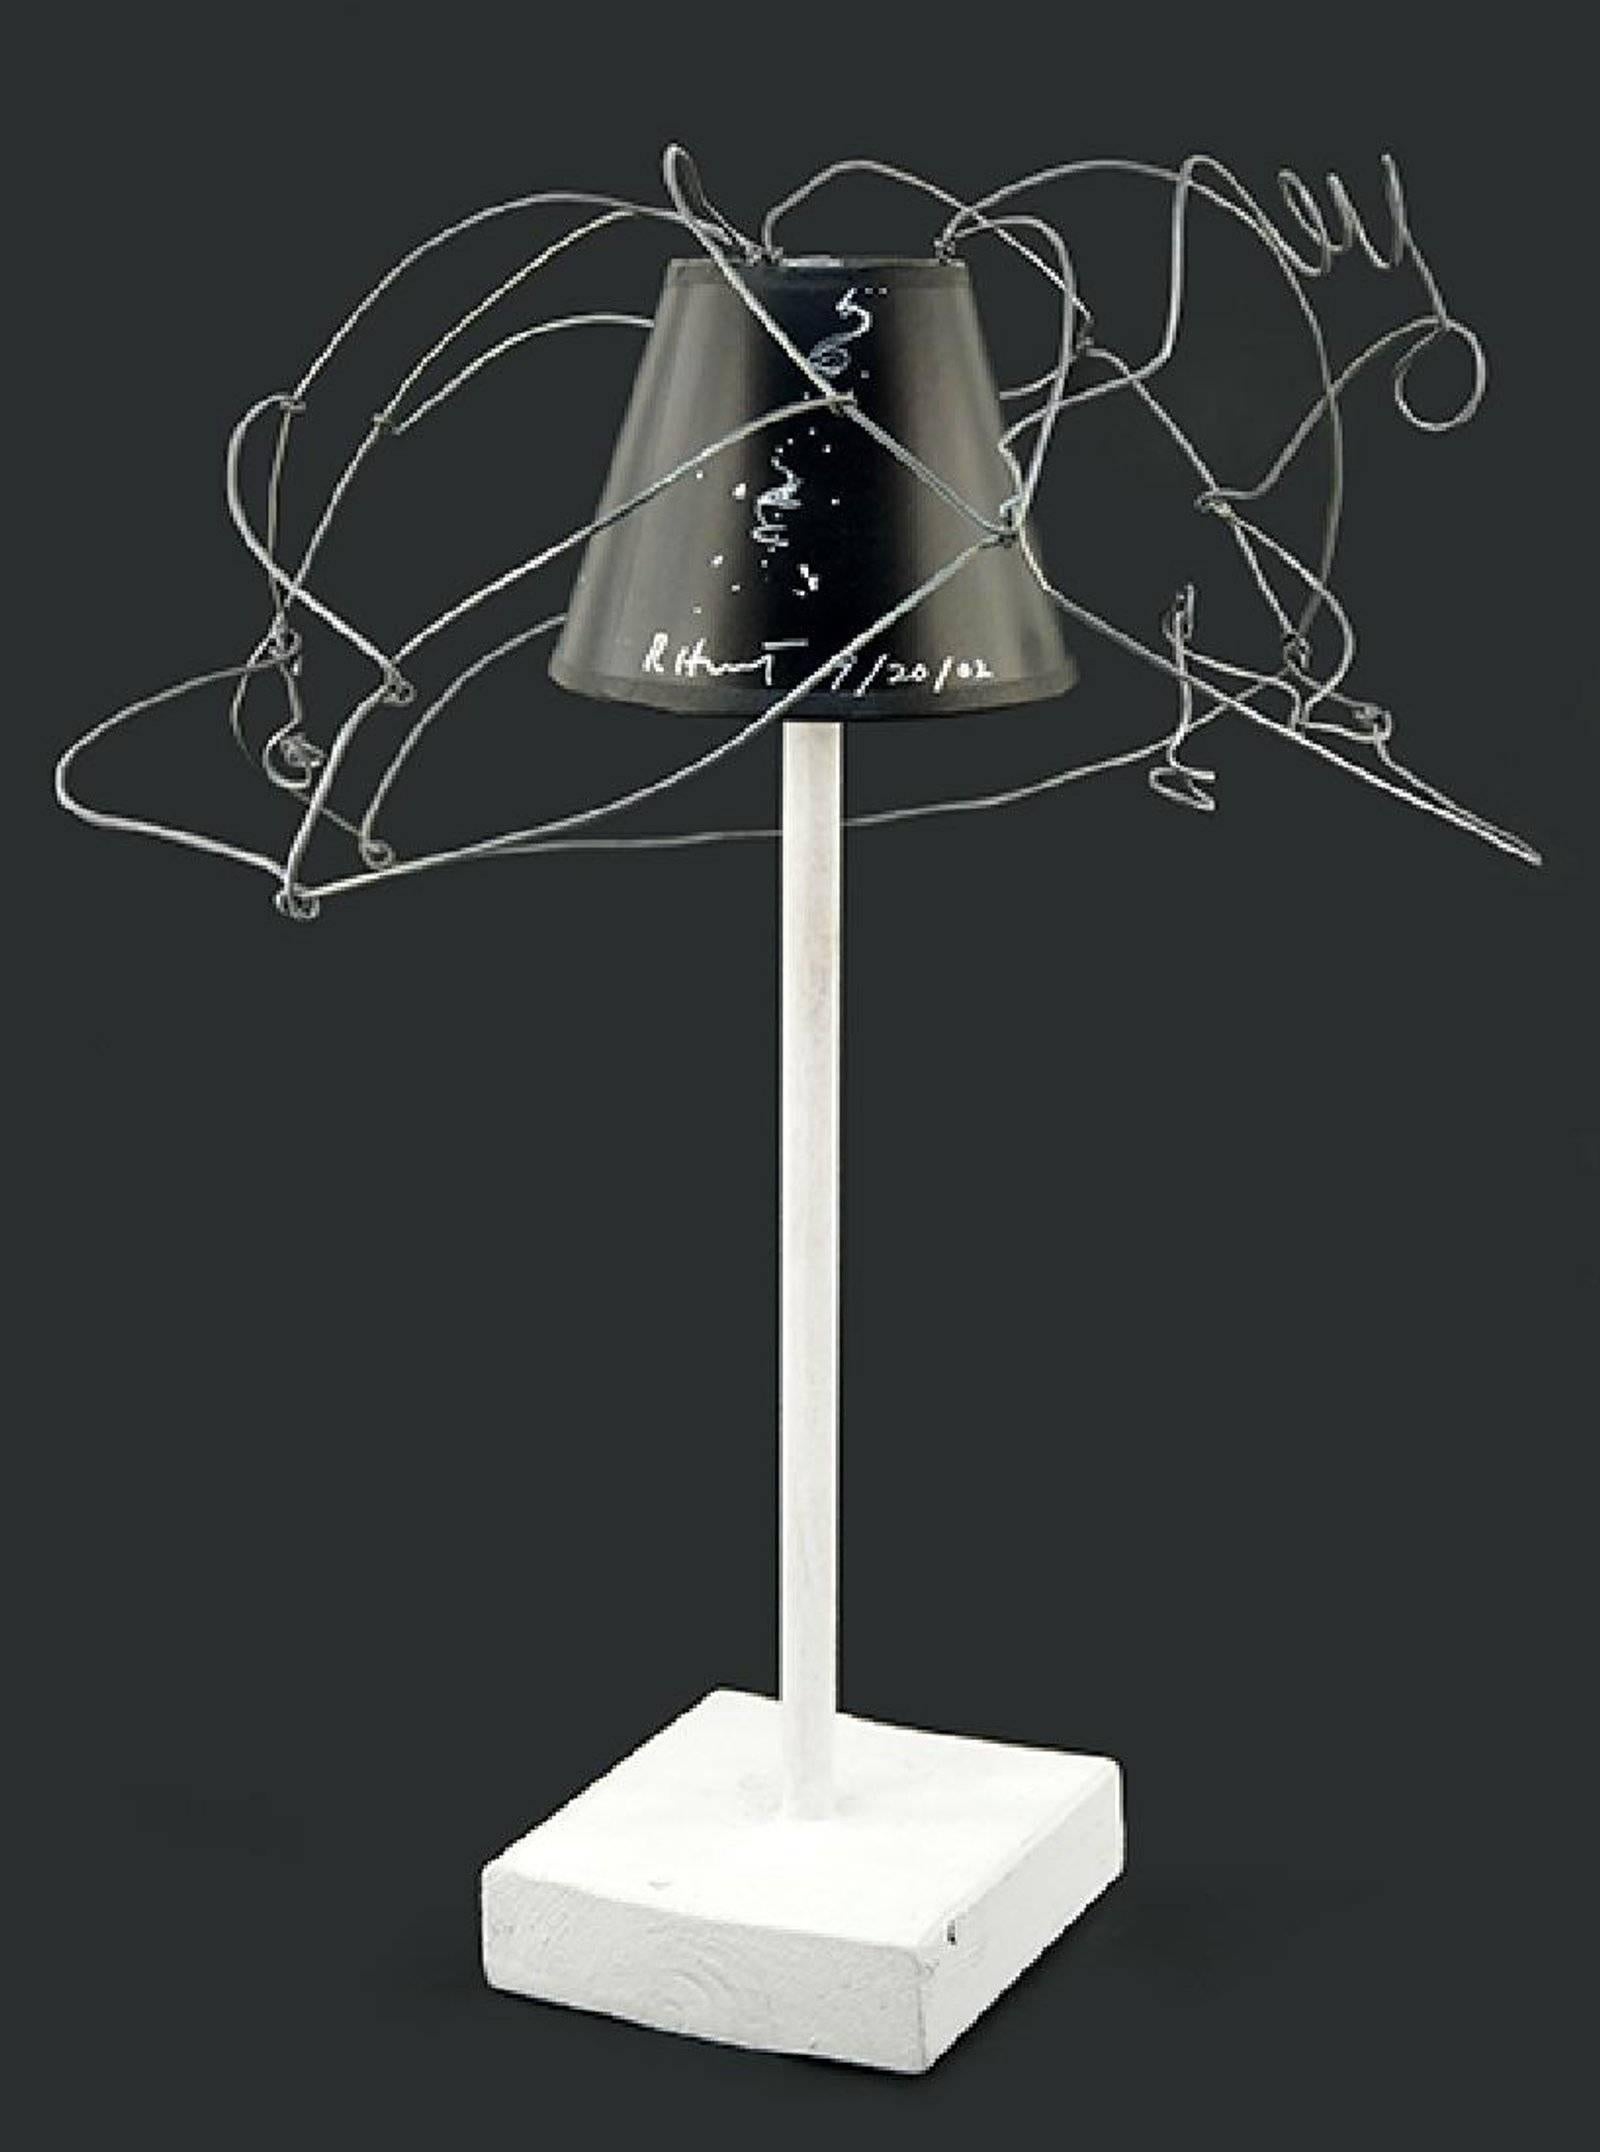 Richard Hunt Abstract Sculpture - Modernist Abstract Mixed Media Sculpture In Metal Wire And Lamp Shade